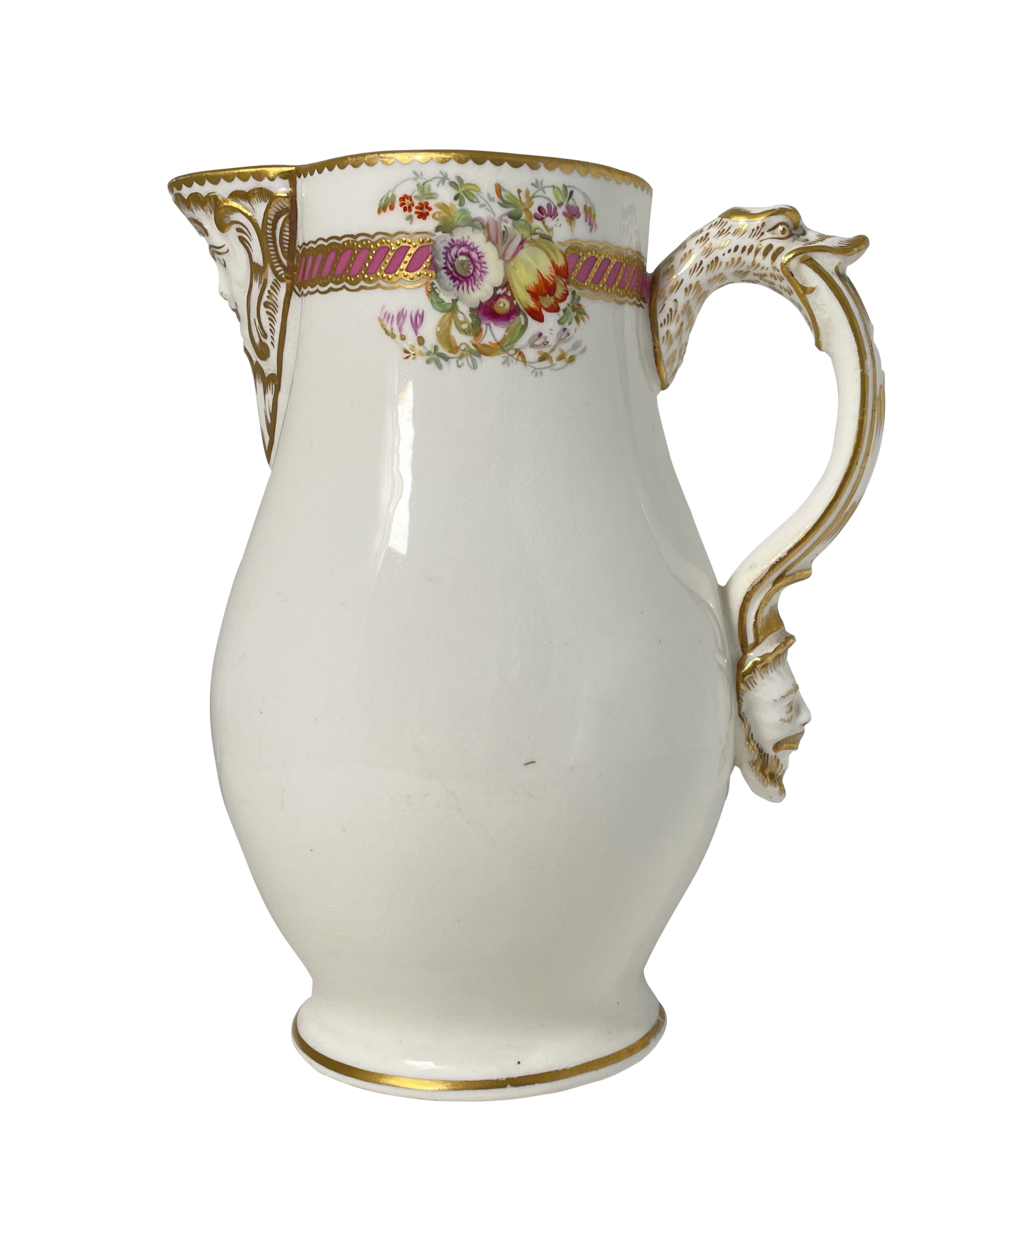 Hand Painted and Gilded Floral Coalport Milk Jug with Mask Face Spout and Handle